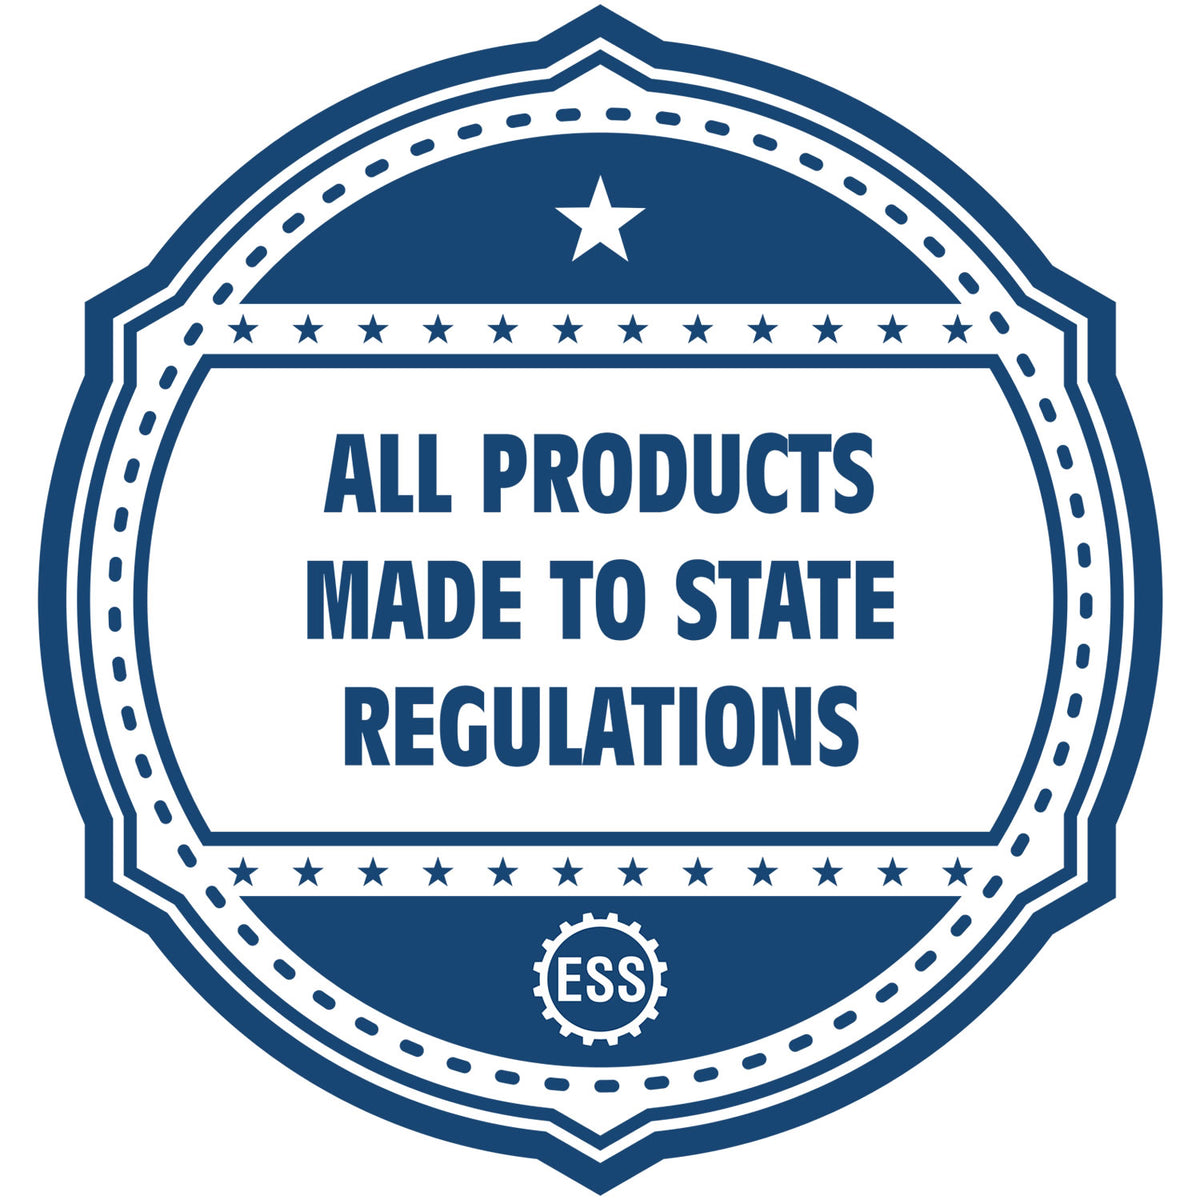 An icon or badge element for the Long Reach Arkansas PE Seal showing that this product is made in compliance with state regulations.